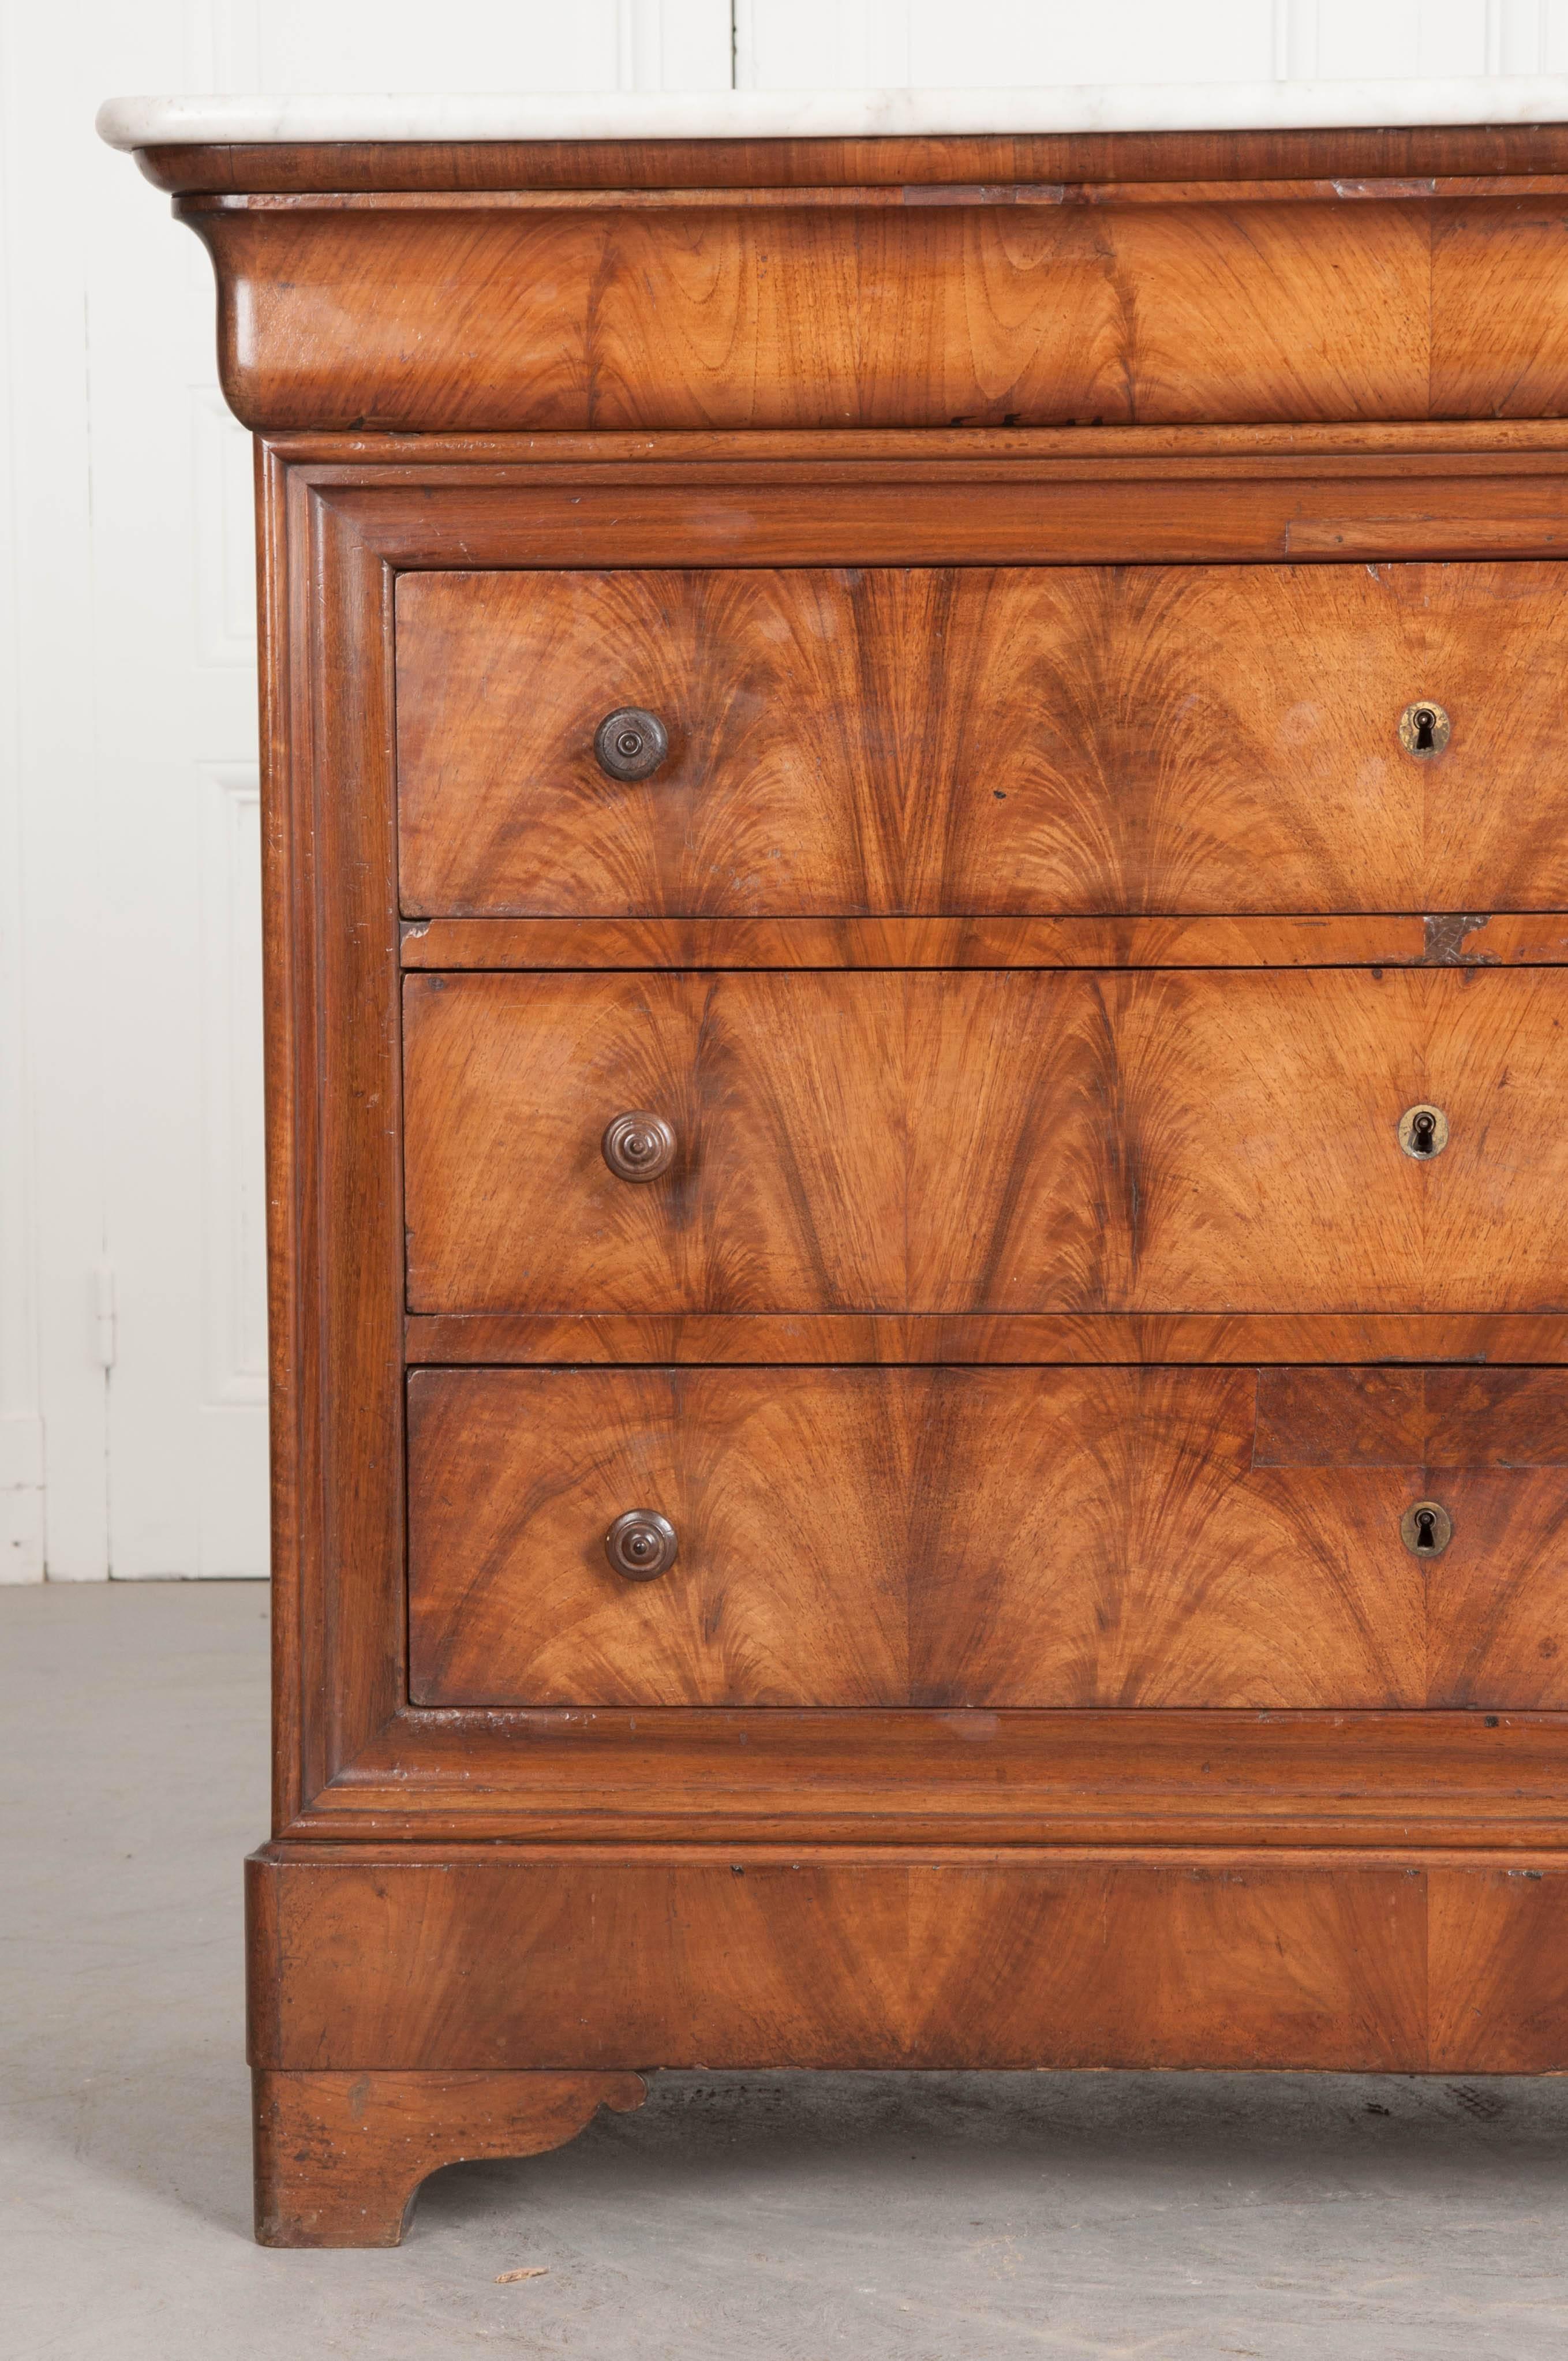 A fantastic mahogany Louis Philippe four-drawer commode from 19th century France. The commode is topped with a beautiful piece of antique marble, with rounded front corners that fit the body perfectly. The shaped apron is, in fact, a hidden drawer.